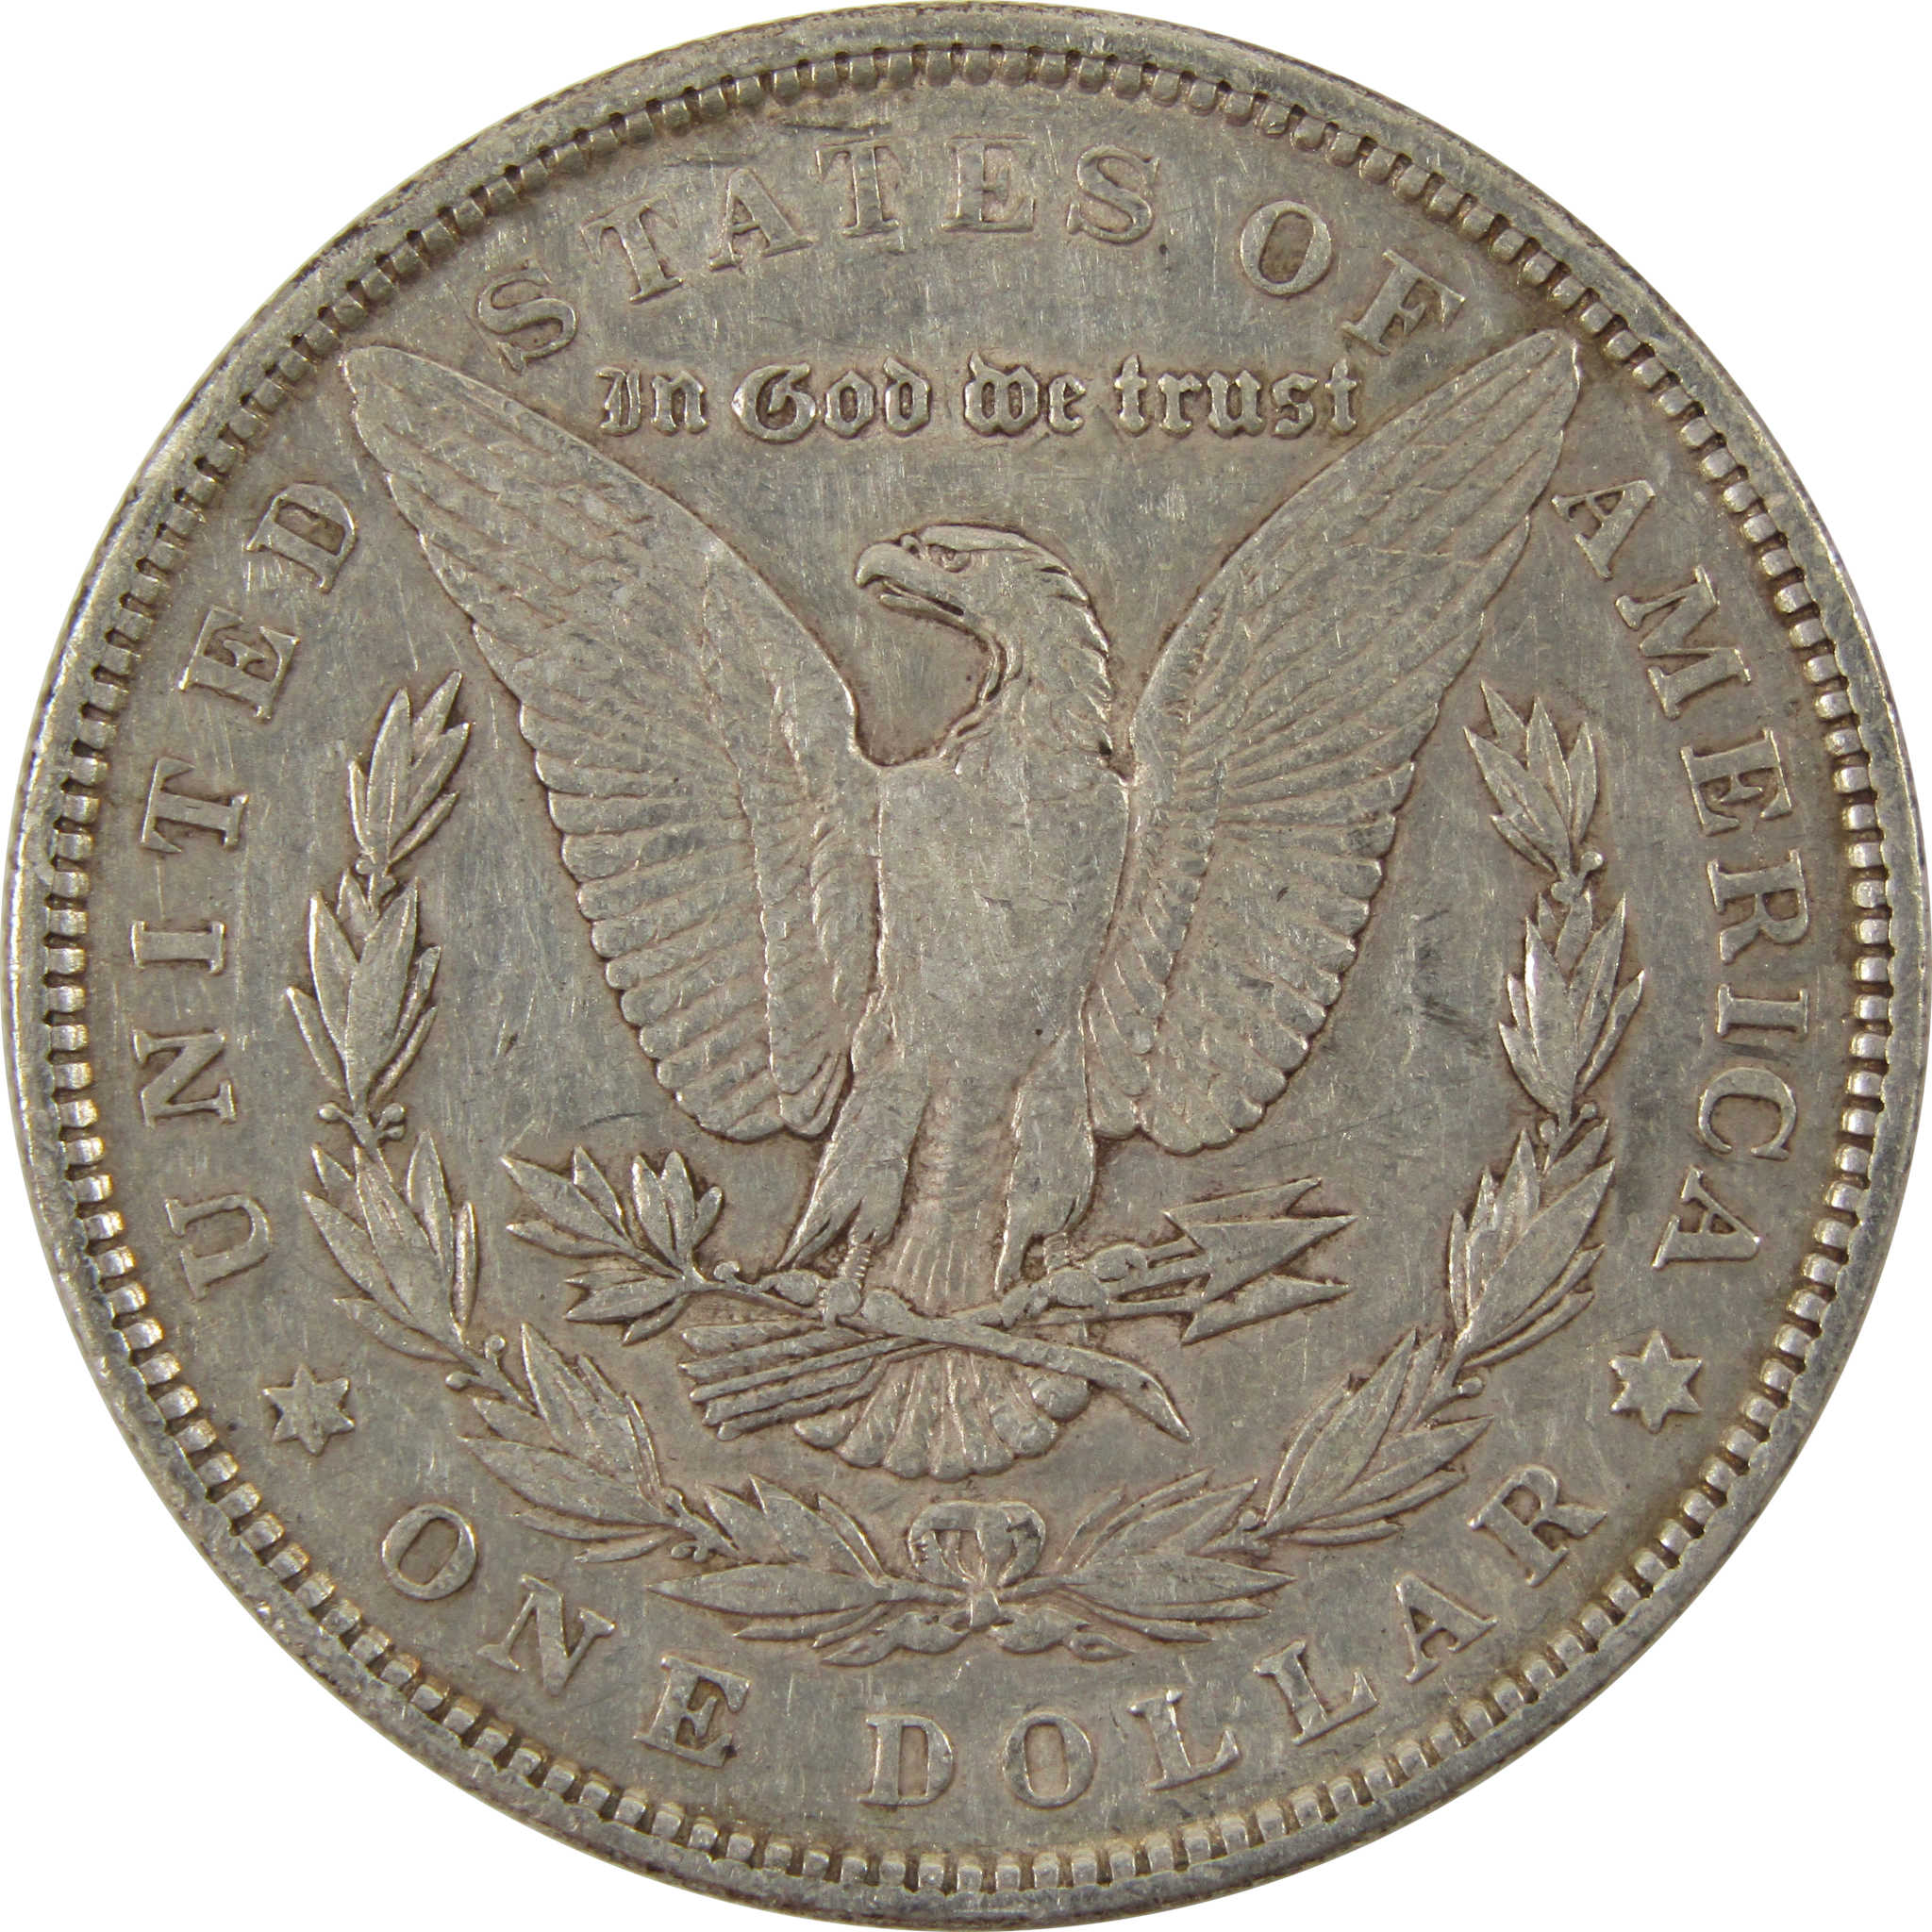 1893 Morgan Dollar XF EF Extremely Fine 90% Silver $1 Coin SKU:I8000 - Morgan coin - Morgan silver dollar - Morgan silver dollar for sale - Profile Coins &amp; Collectibles